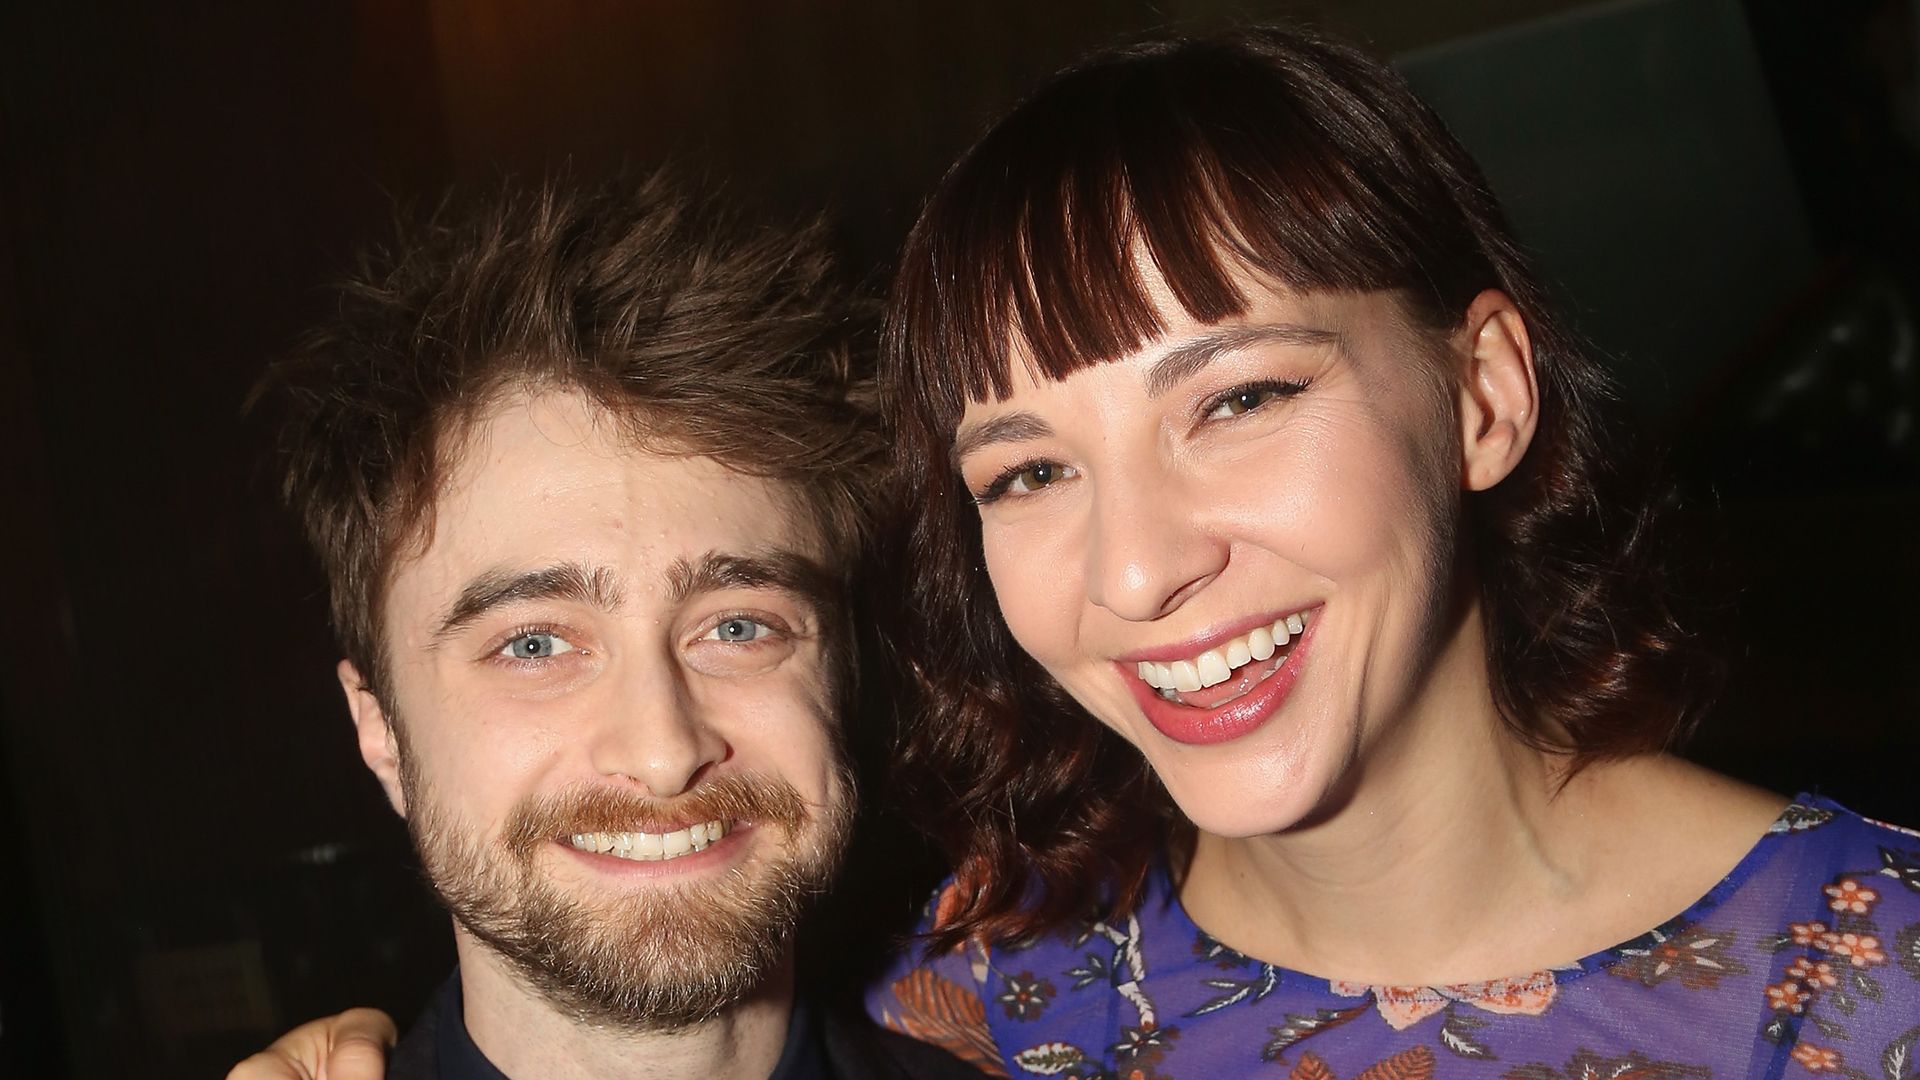 Daniel Radcliffe and girlfriend Erin Darke pose at the opening night after party for the new hit play "The Lifespan of A Fact" on Broadway at Brasserie 8 1/2 on October 18, 2018 in New York City